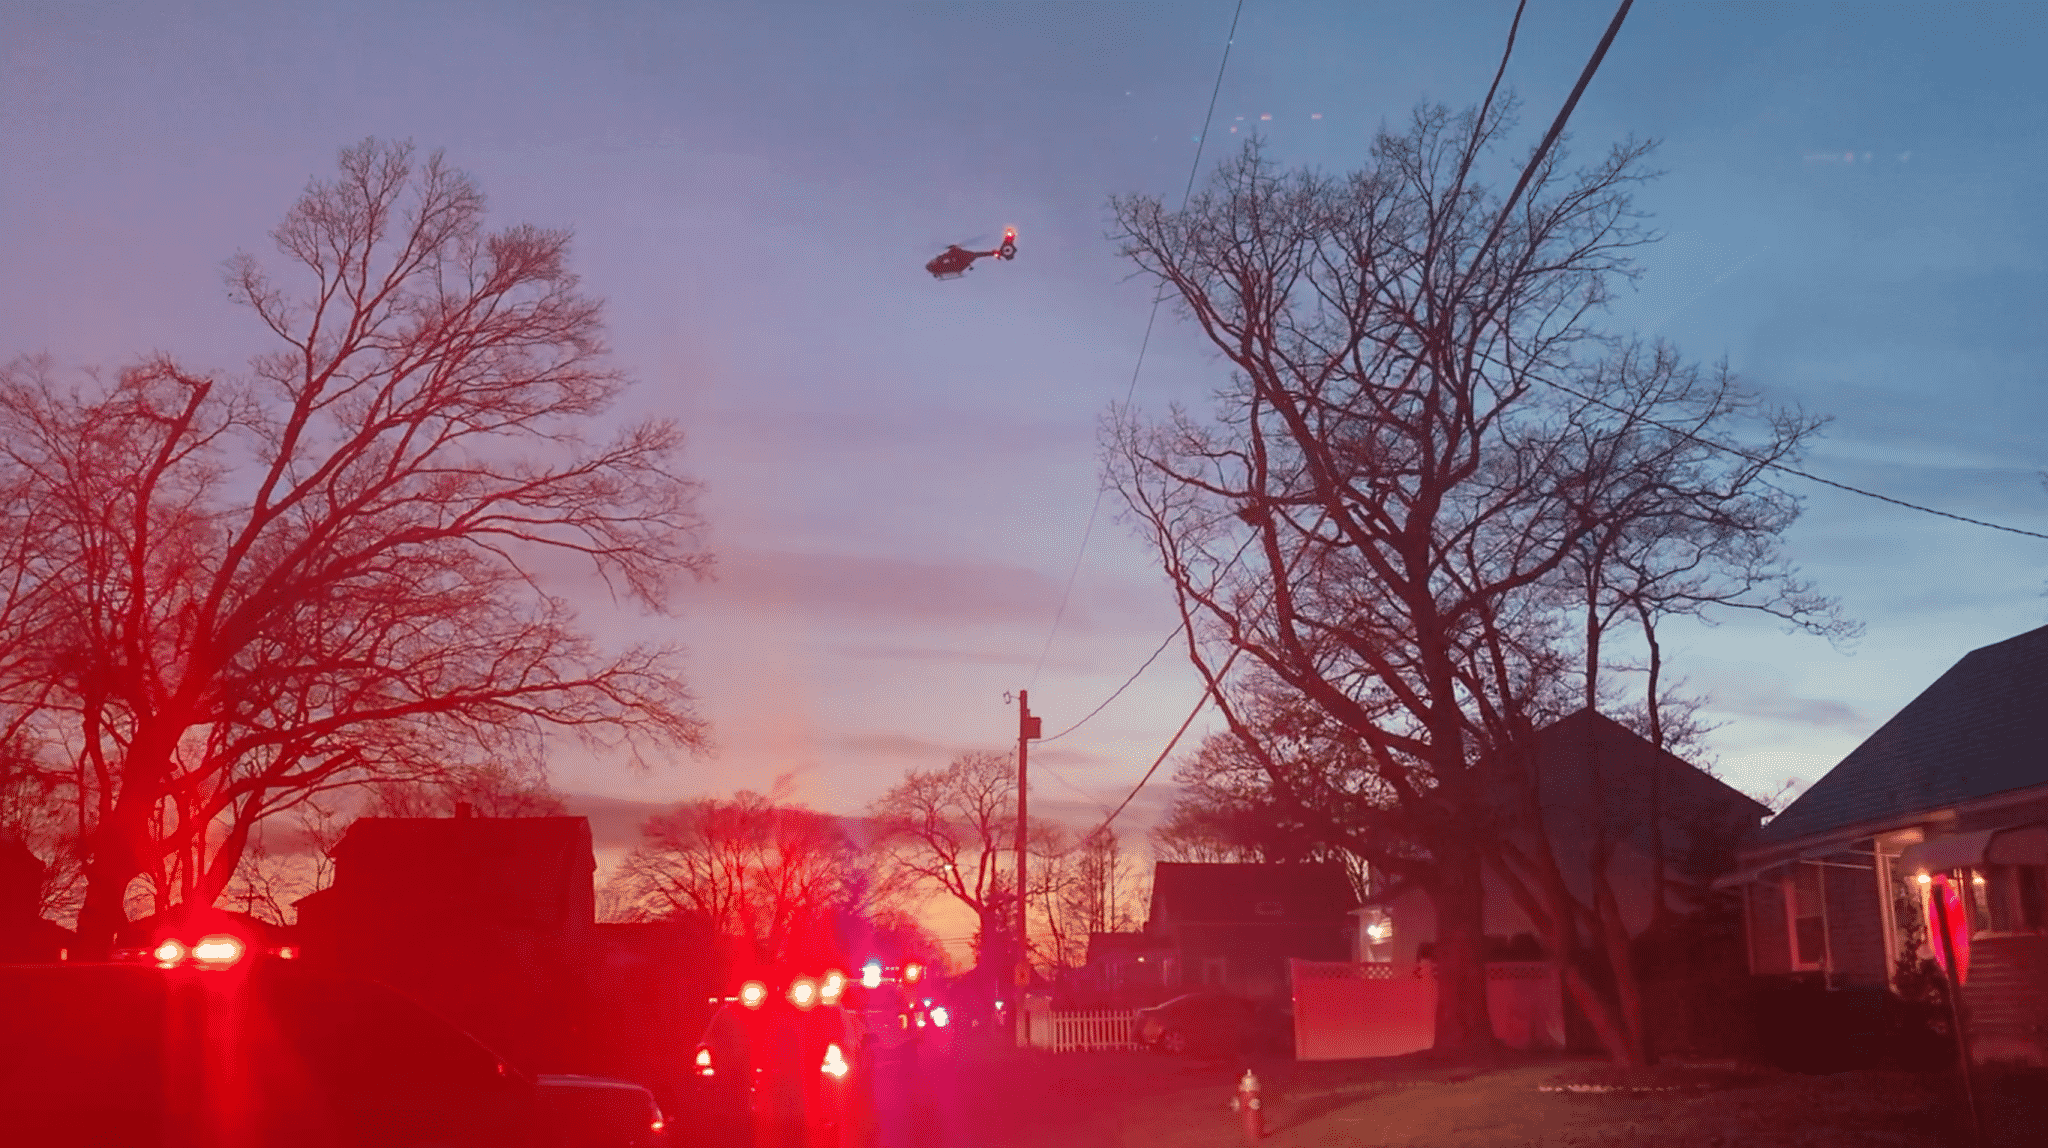 [CREDIT: Rob Borkowski] Rowan's Light Parade of more than 100 first responder vehicles to Rowan Shaw's Doris Avenue home Monday night, sent a helicopter, too.